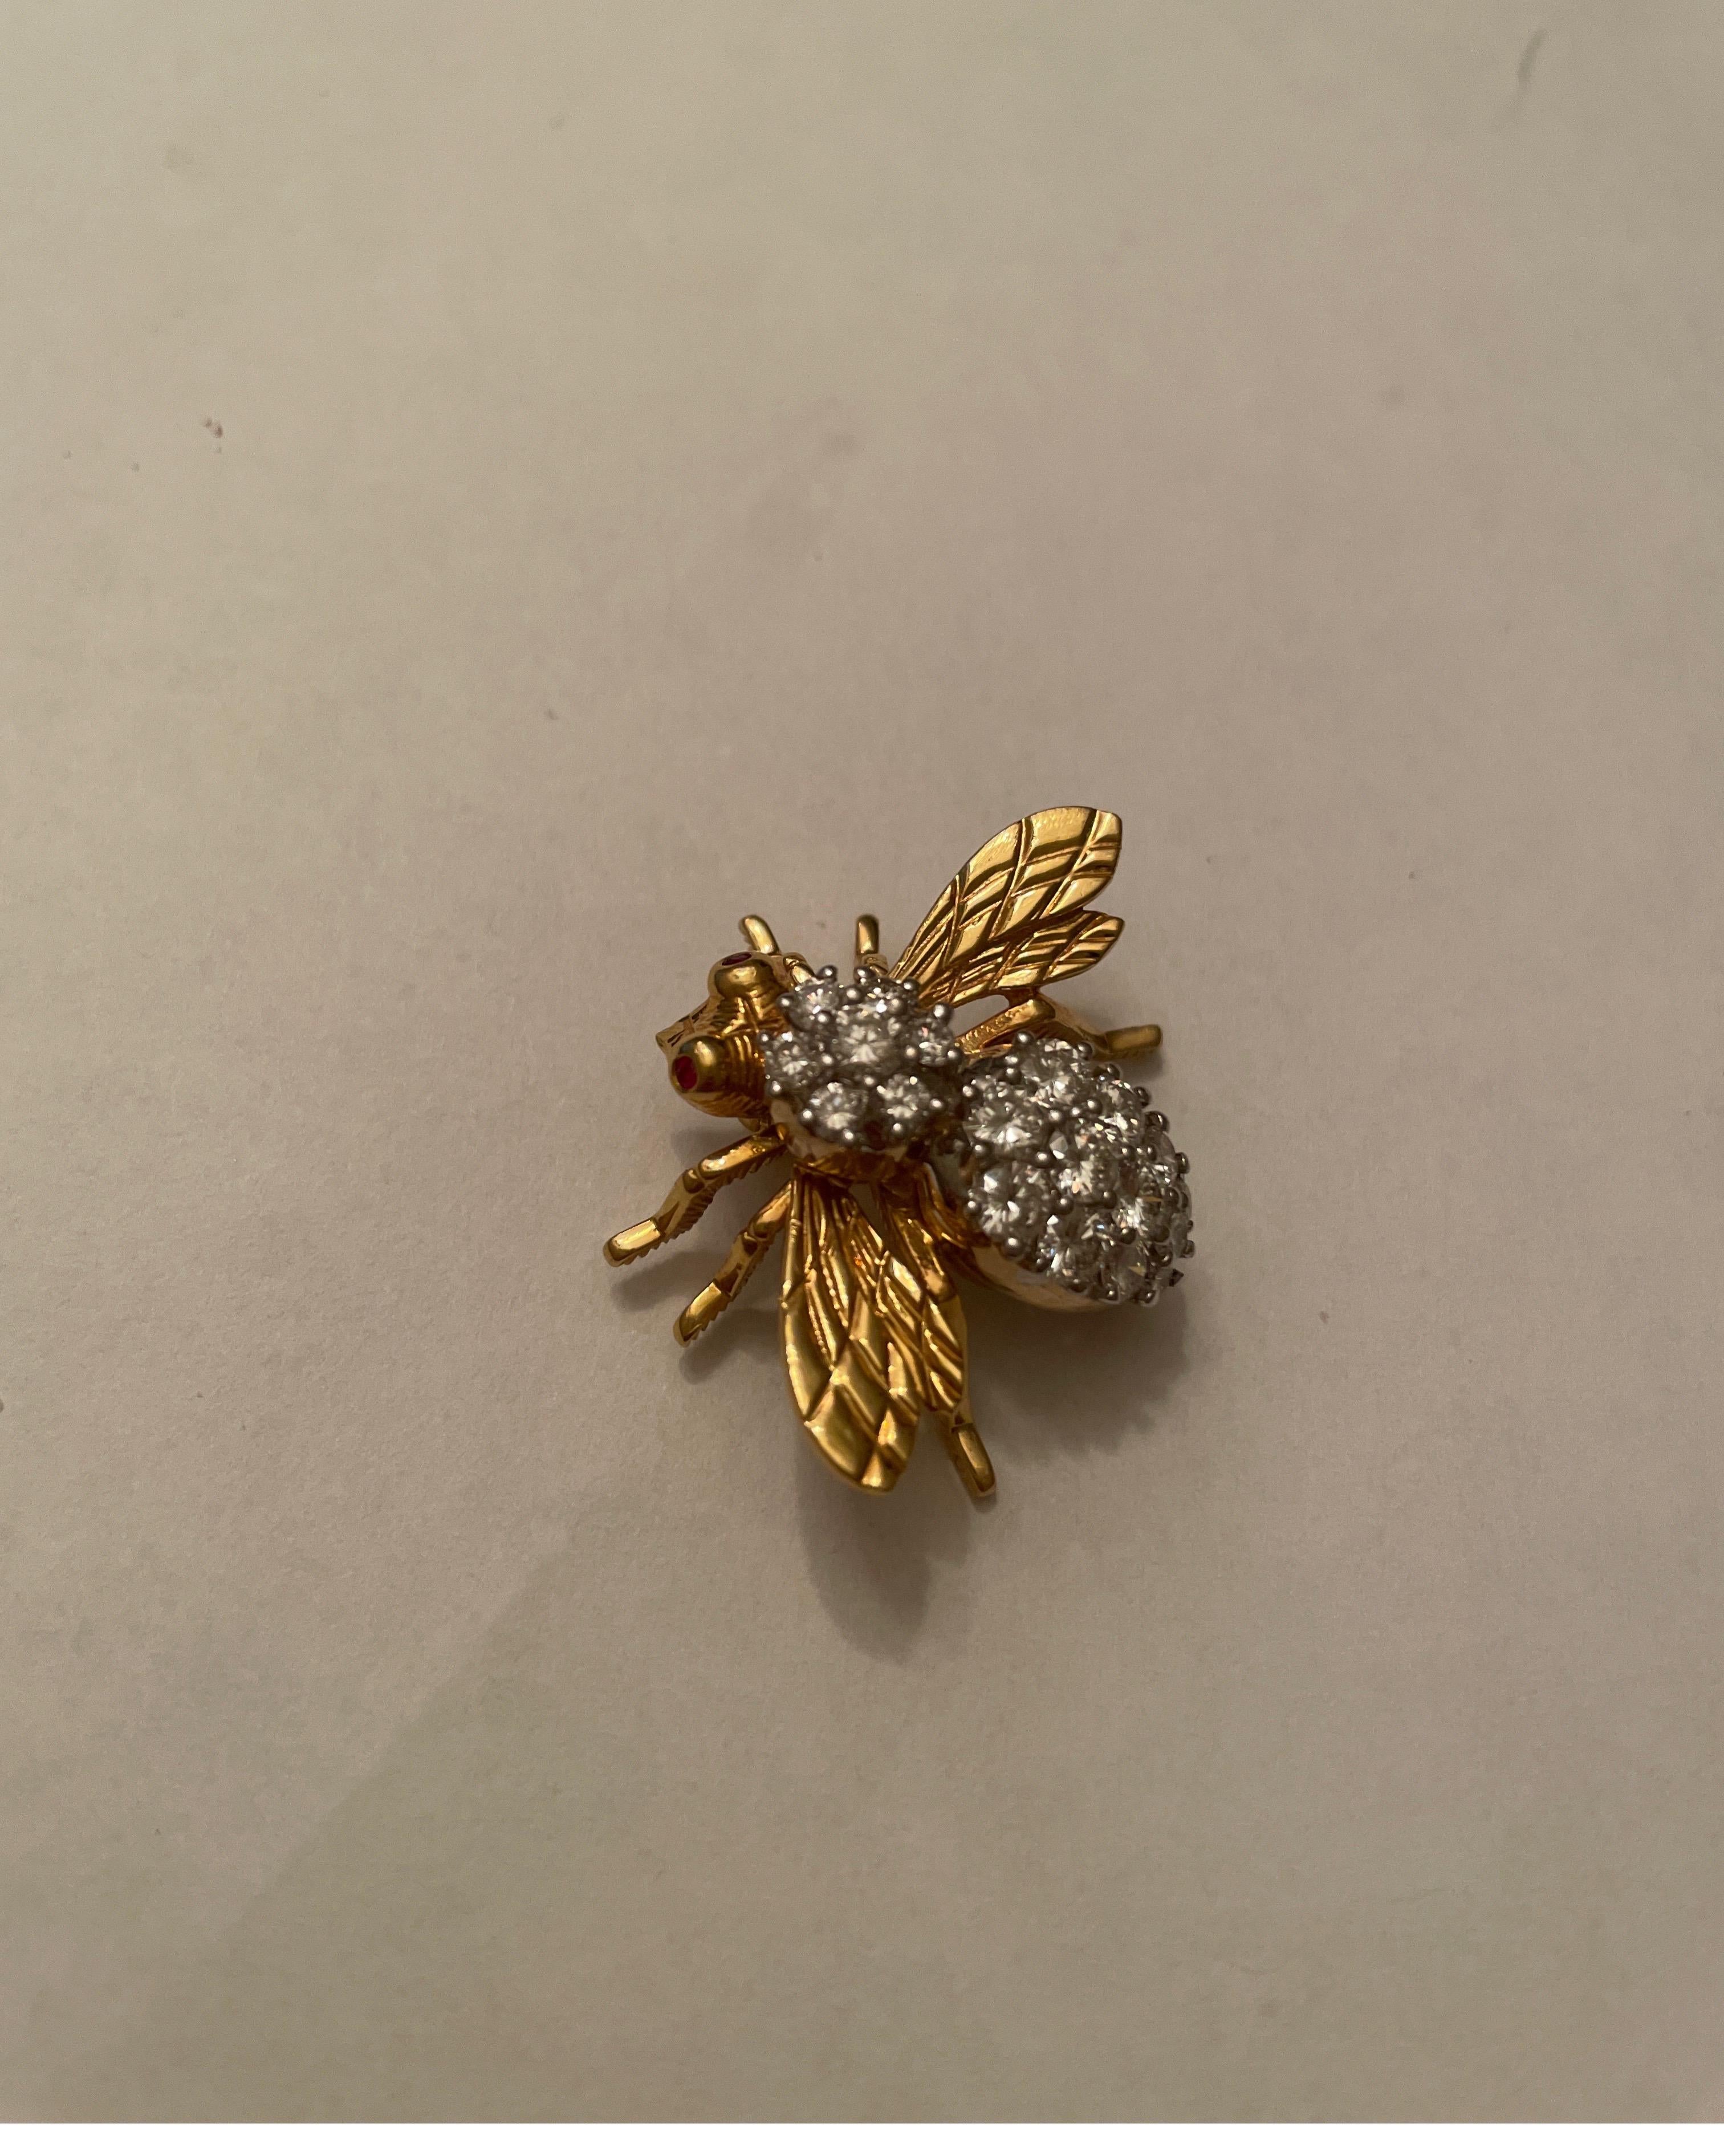 18K yellow gold Rosenthal diamond bee pin,  prong set with 19 full cut round diamonds weighing 1.97cts, and bezel set ruby eyes.
retail $7500